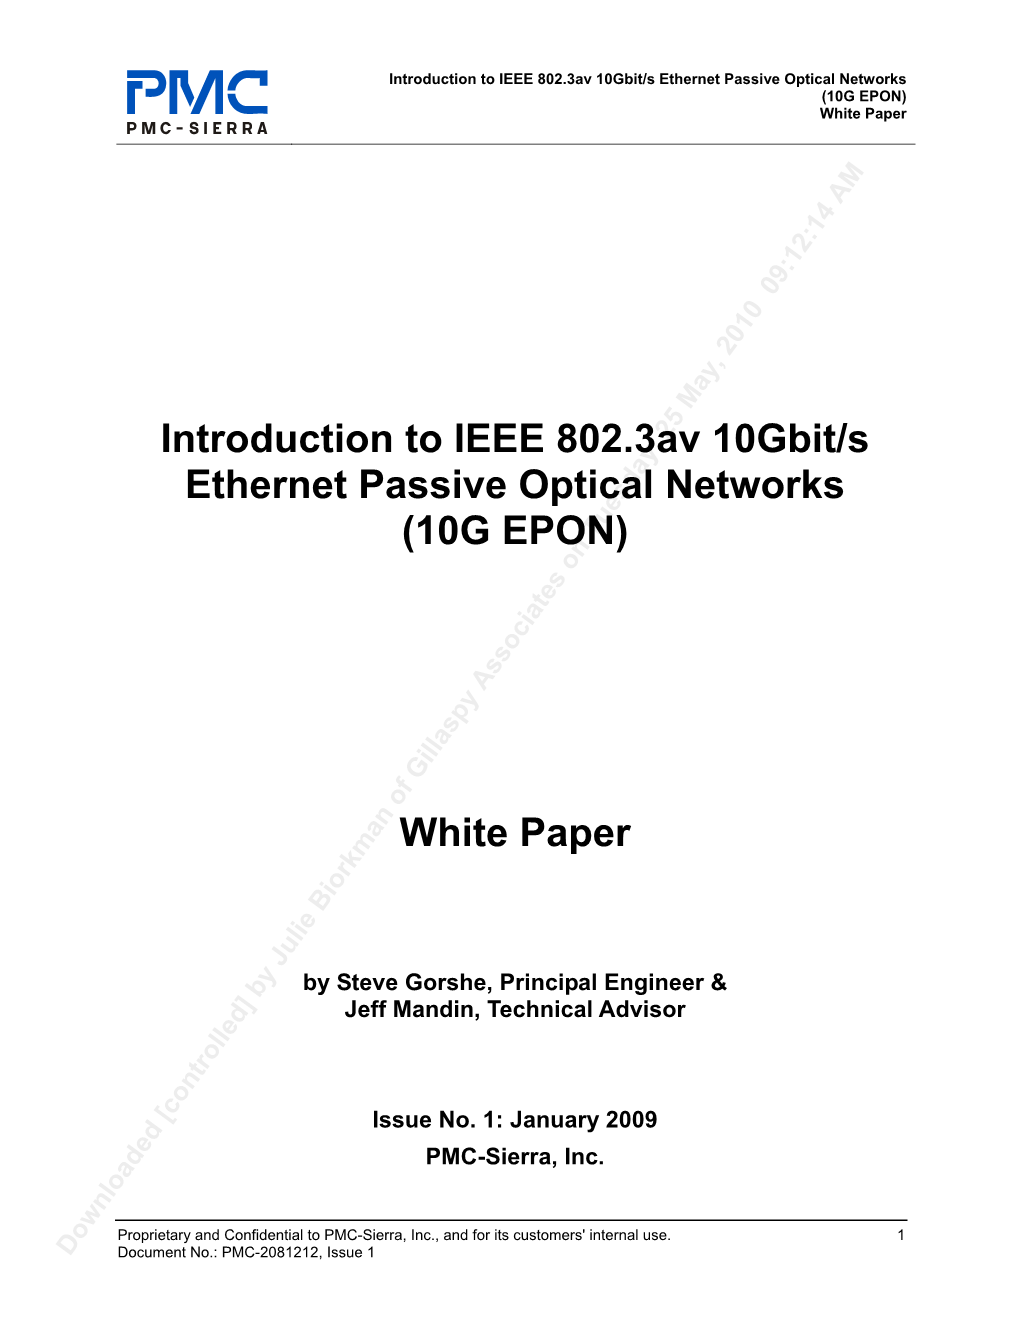 Introduction to IEEE 802.3Av 10Gbit/S Ethernet Passive Optical Networks (10G EPON) White Paper